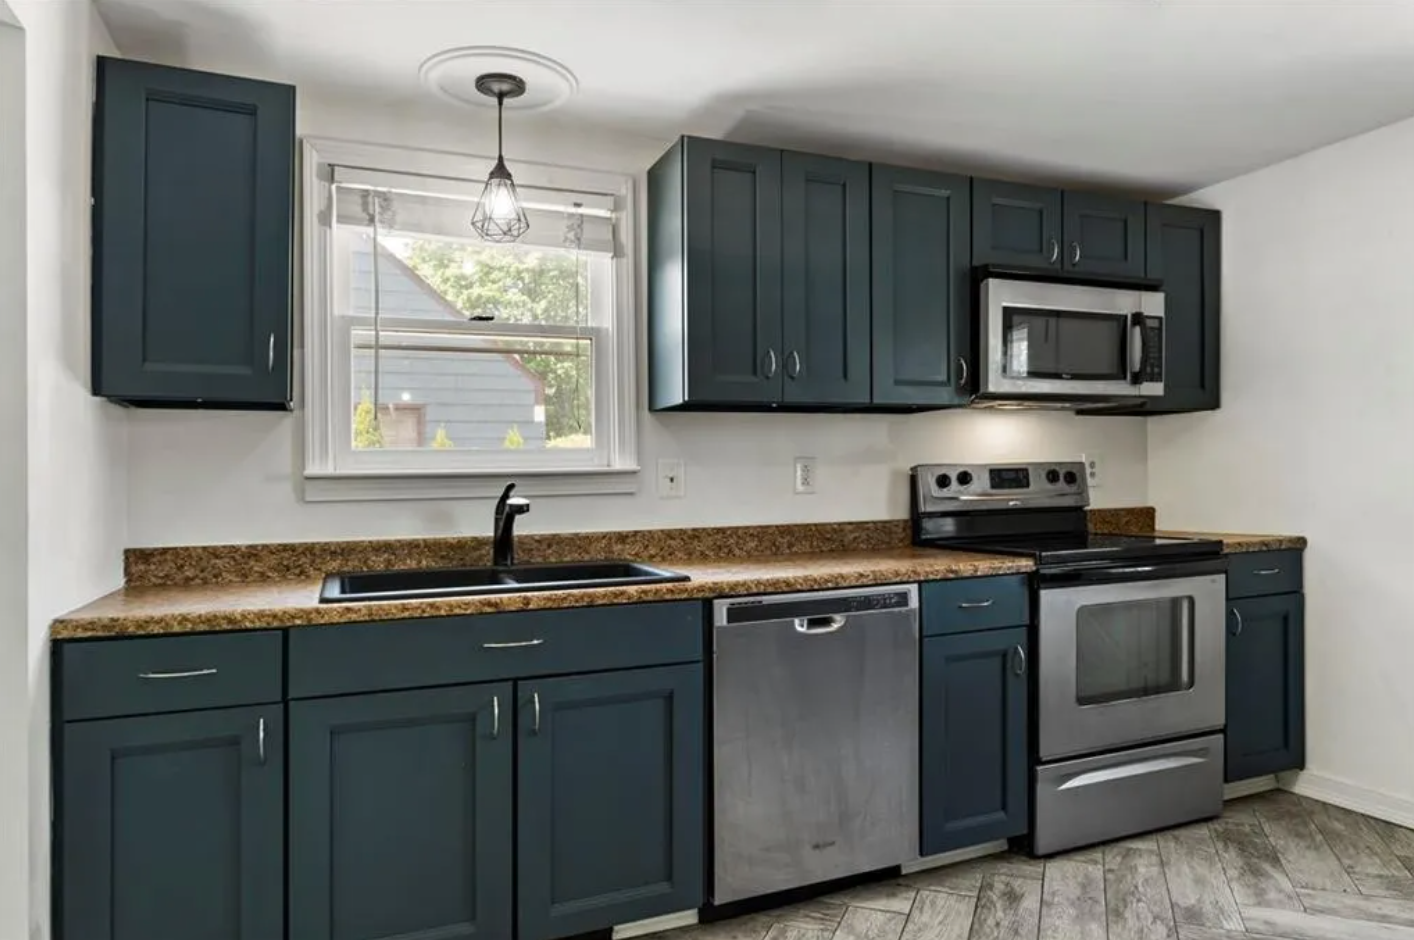 Kitchen with single-hung window, dark blue Shaker-style cabinets and stainless steel appliances.